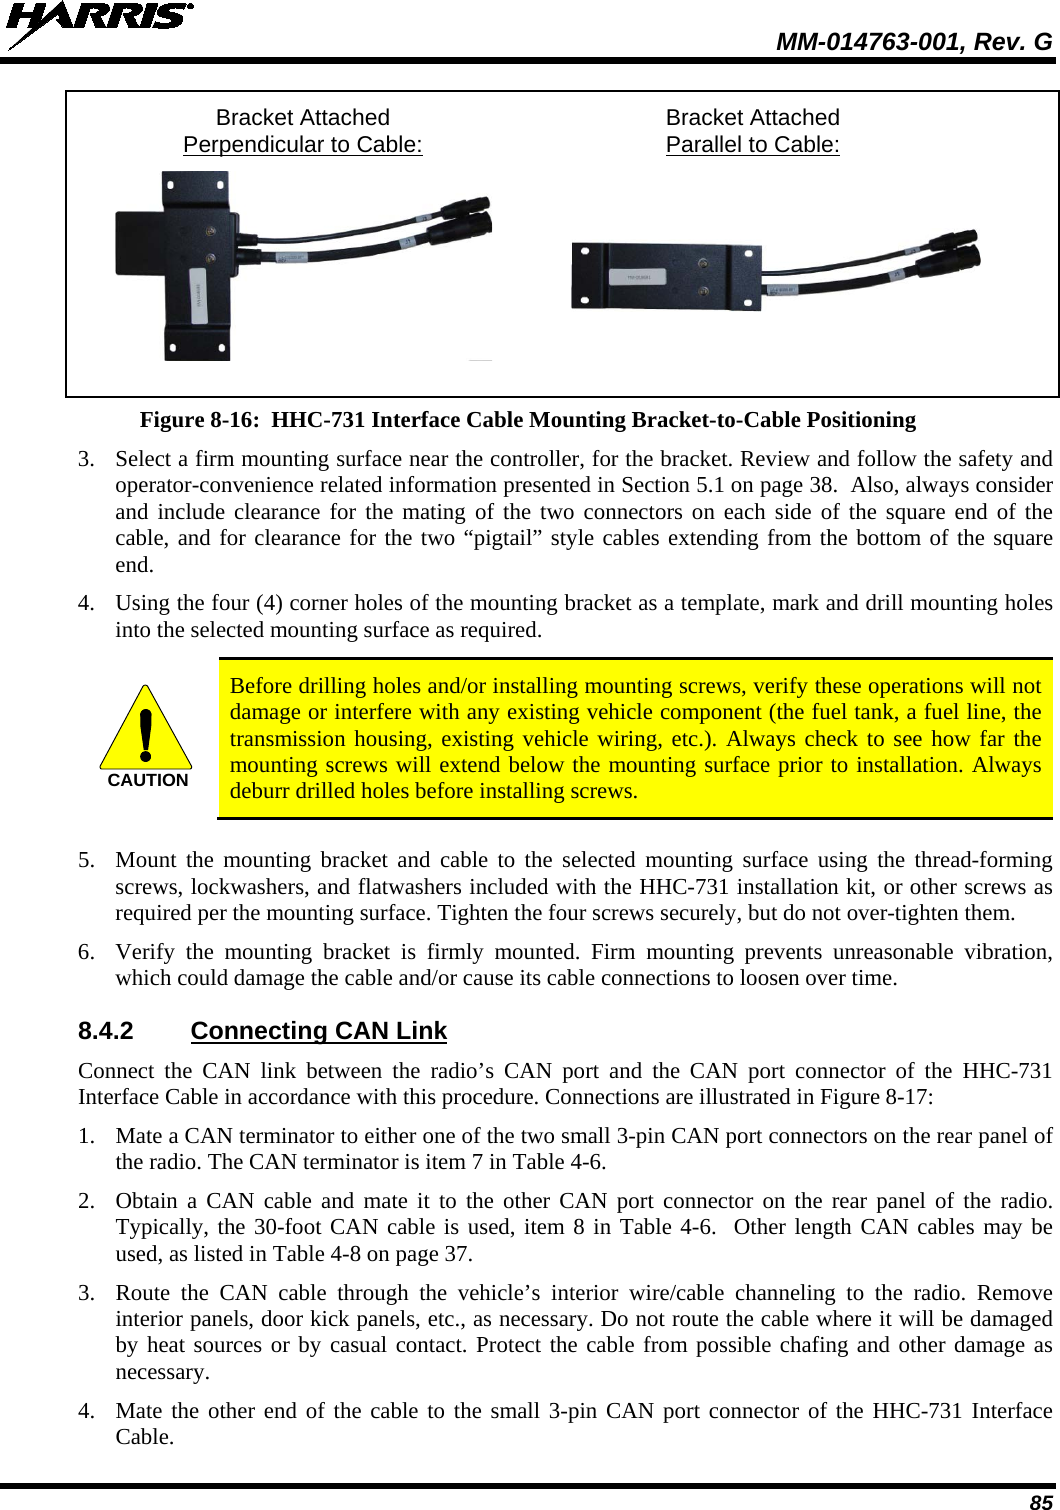  MM-014763-001, Rev. G 85  Bracket Attached Bracket Attached   Perpendicular to Cable:  Parallel to Cable:     Figure 8-16:  HHC-731 Interface Cable Mounting Bracket-to-Cable Positioning 3. Select a firm mounting surface near the controller, for the bracket. Review and follow the safety and operator-convenience related information presented in Section 5.1 on page 38.  Also, always consider and include clearance for the mating of the two connectors on each side of the square end of the cable, and for clearance for the two “pigtail” style cables extending from the bottom of the square end. 4. Using the four (4) corner holes of the mounting bracket as a template, mark and drill mounting holes into the selected mounting surface as required.   Before drilling holes and/or installing mounting screws, verify these operations will not damage or interfere with any existing vehicle component (the fuel tank, a fuel line, the transmission housing, existing vehicle wiring, etc.). Always check to see how far the mounting screws will extend below the mounting surface prior to installation. Always deburr drilled holes before installing screws.  5. Mount the mounting bracket and cable to the selected mounting surface using the thread-forming screws, lockwashers, and flatwashers included with the HHC-731 installation kit, or other screws as required per the mounting surface. Tighten the four screws securely, but do not over-tighten them. 6. Verify the mounting  bracket is firmly mounted. Firm mounting prevents unreasonable vibration, which could damage the cable and/or cause its cable connections to loosen over time. 8.4.2 Connecting CAN Link Connect the CAN link between the radio’s CAN port and the CAN port connector of the HHC-731 Interface Cable in accordance with this procedure. Connections are illustrated in Figure 8-17: 1. Mate a CAN terminator to either one of the two small 3-pin CAN port connectors on the rear panel of the radio. The CAN terminator is item 7 in Table 4-6. 2. Obtain a CAN cable and mate it to the other CAN port connector on the rear panel of the radio. Typically, the 30-foot CAN cable is used, item 8 in Table 4-6.  Other length CAN cables may be used, as listed in Table 4-8 on page 37. 3. Route the CAN  cable through the vehicle’s interior wire/cable channeling to the radio. Remove interior panels, door kick panels, etc., as necessary. Do not route the cable where it will be damaged by heat sources or by casual contact. Protect the cable from possible chafing and other damage as necessary. 4. Mate the other end of the cable to the small 3-pin CAN port connector of the HHC-731 Interface Cable. CAUTION